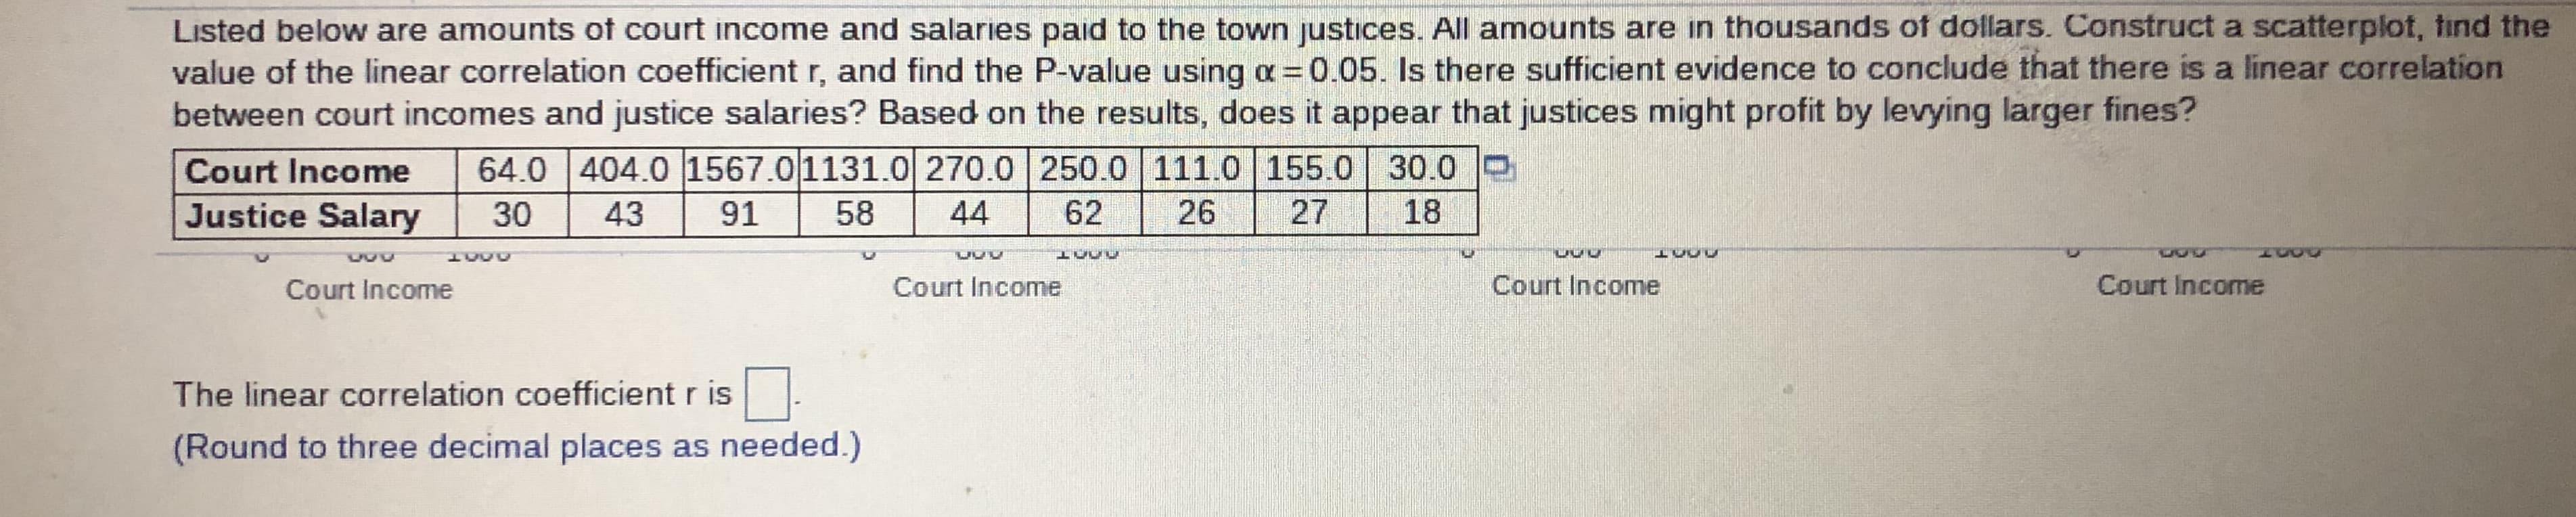 Listed below are amounts of court income and salaries paid to the town justices. All amounts are in thousands of dollars. Construct a scatterplot, tind the
value of the linear correlation coefficient r, and find the P-value using a = 0.05. Is there sufficient evidence to conclude that there is a linear correlation
between court incomes and justice salaries? Based on the results, does it appear that justices might profit by levying larger fines?
Court Income
64.0 |404.0 1567.01131.o 270.0 250.0 111.0 155.0 30.0 D
Justice Salary
30
43
91
58
44
62
26
27
18
1000
1000
1657
80
Court Income
Court Income
Court Income
Court Income
The linear correlation coefficient r is
(Round to three decimal places as needed.)
